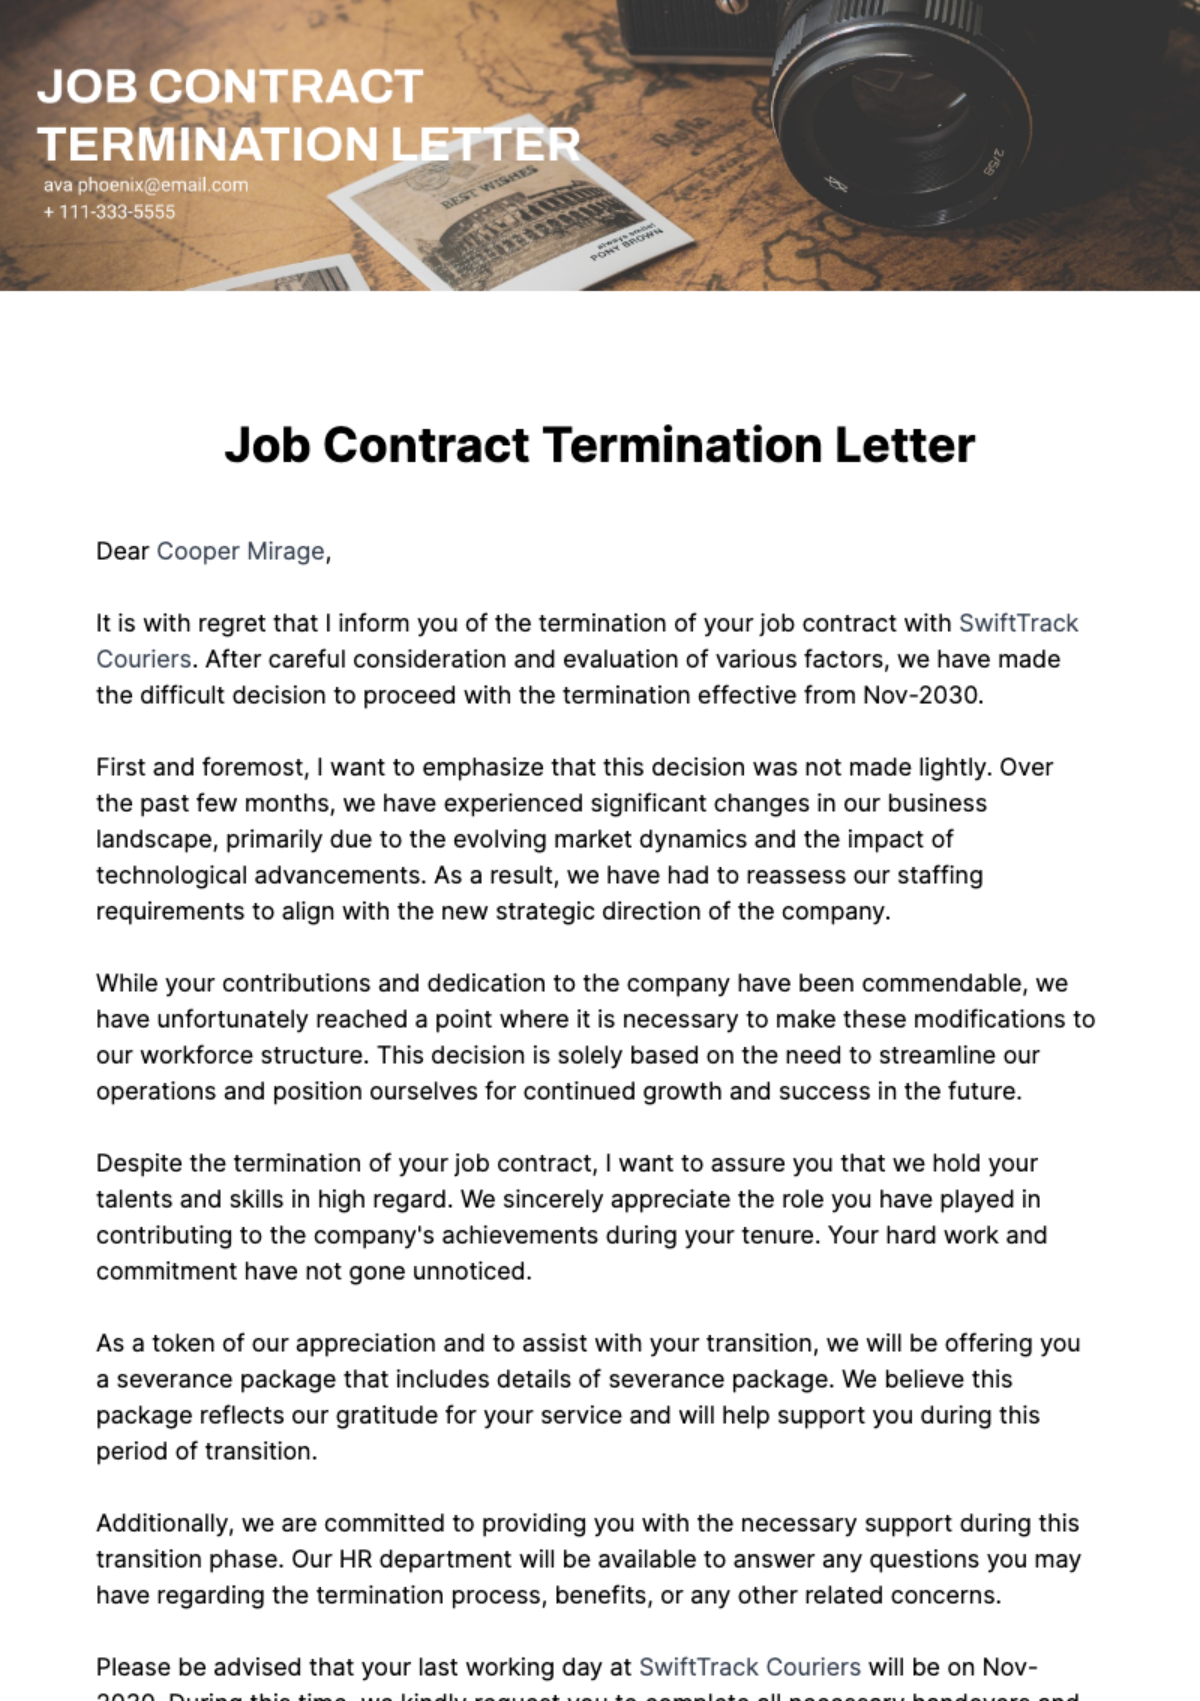 Job Contract Termination Letter Template